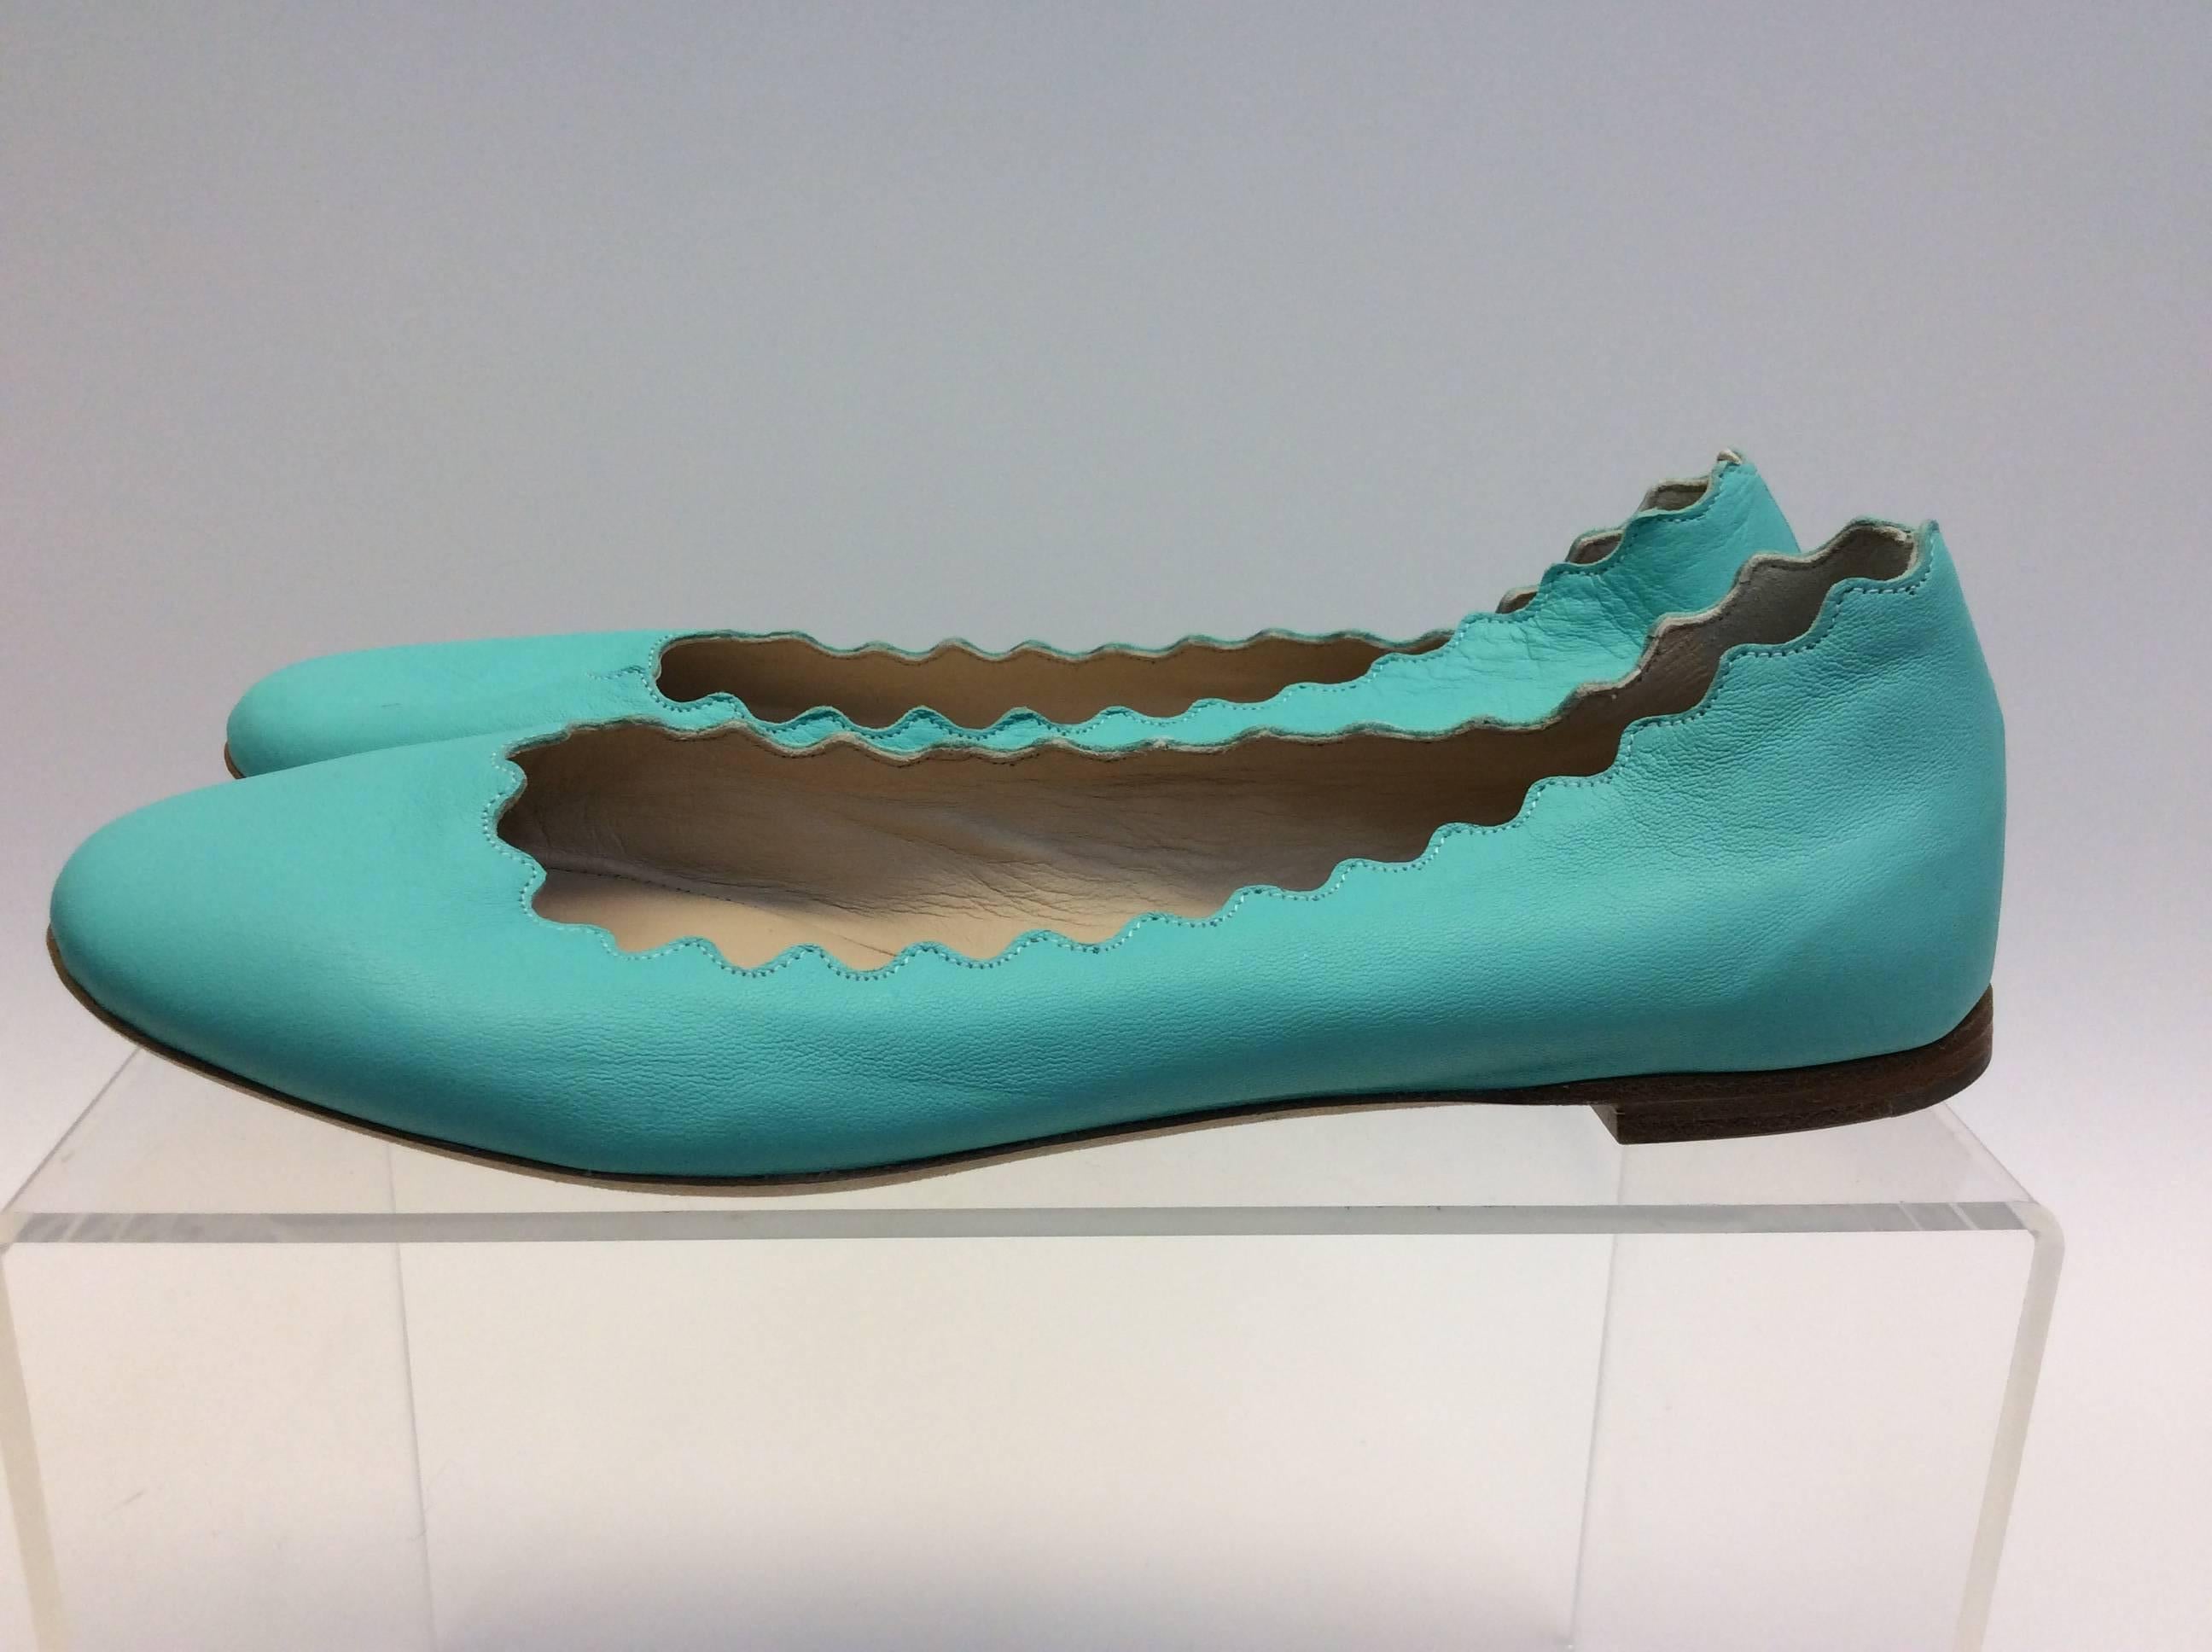 Chloe Green Leather Flats
$365
Never worn
Made in Italy
Size 38.5

